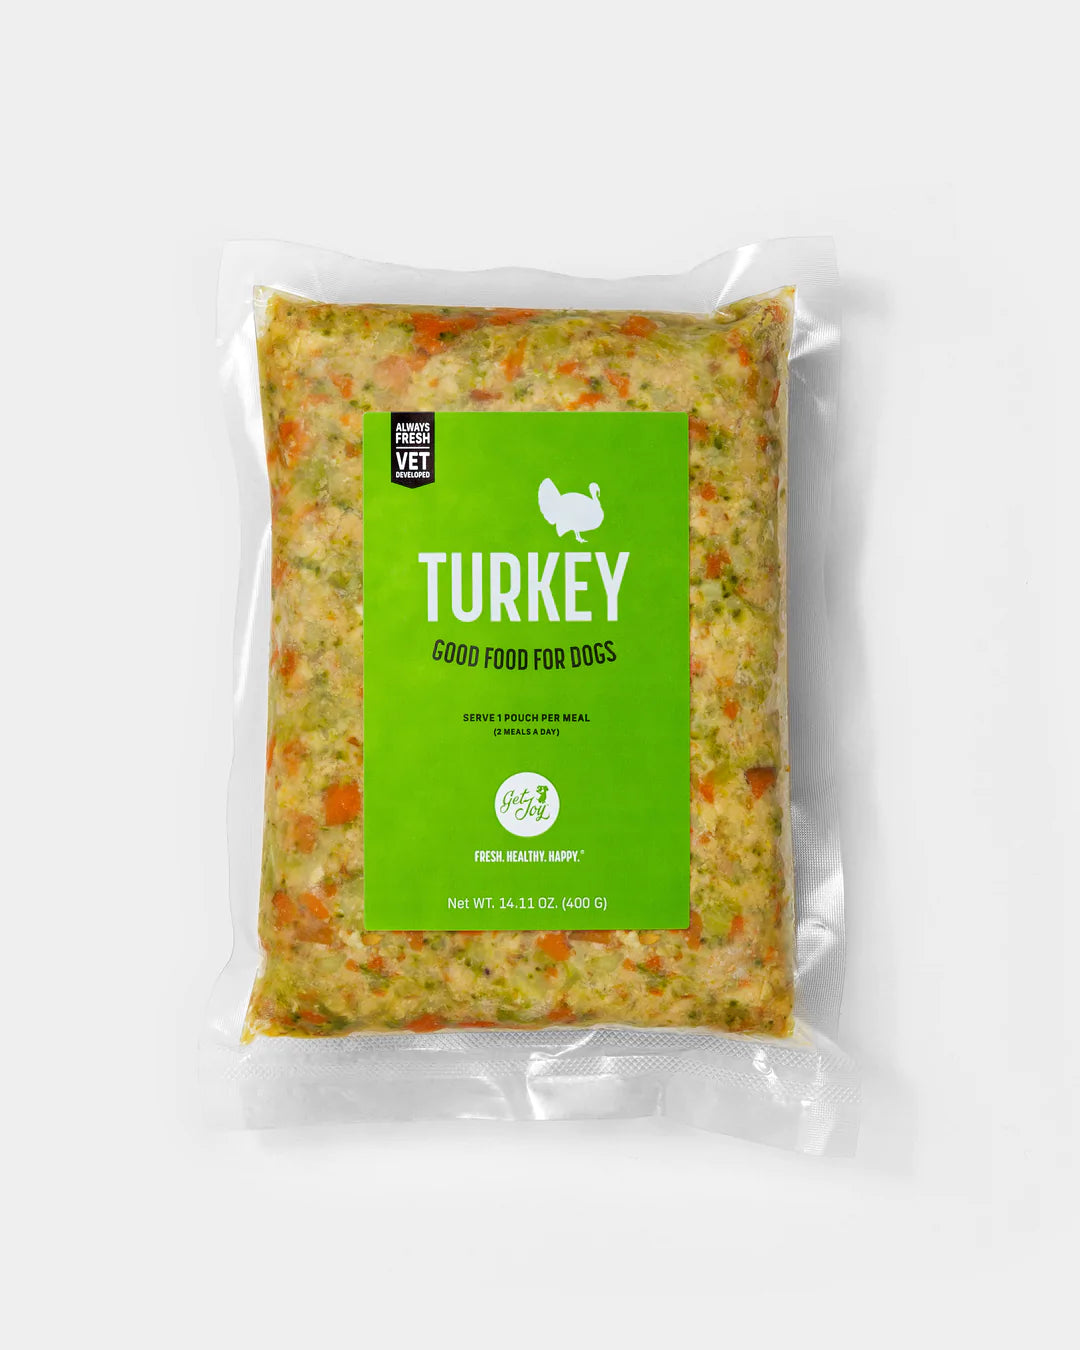 Your dog's Fresh Meal Plan TURKEY